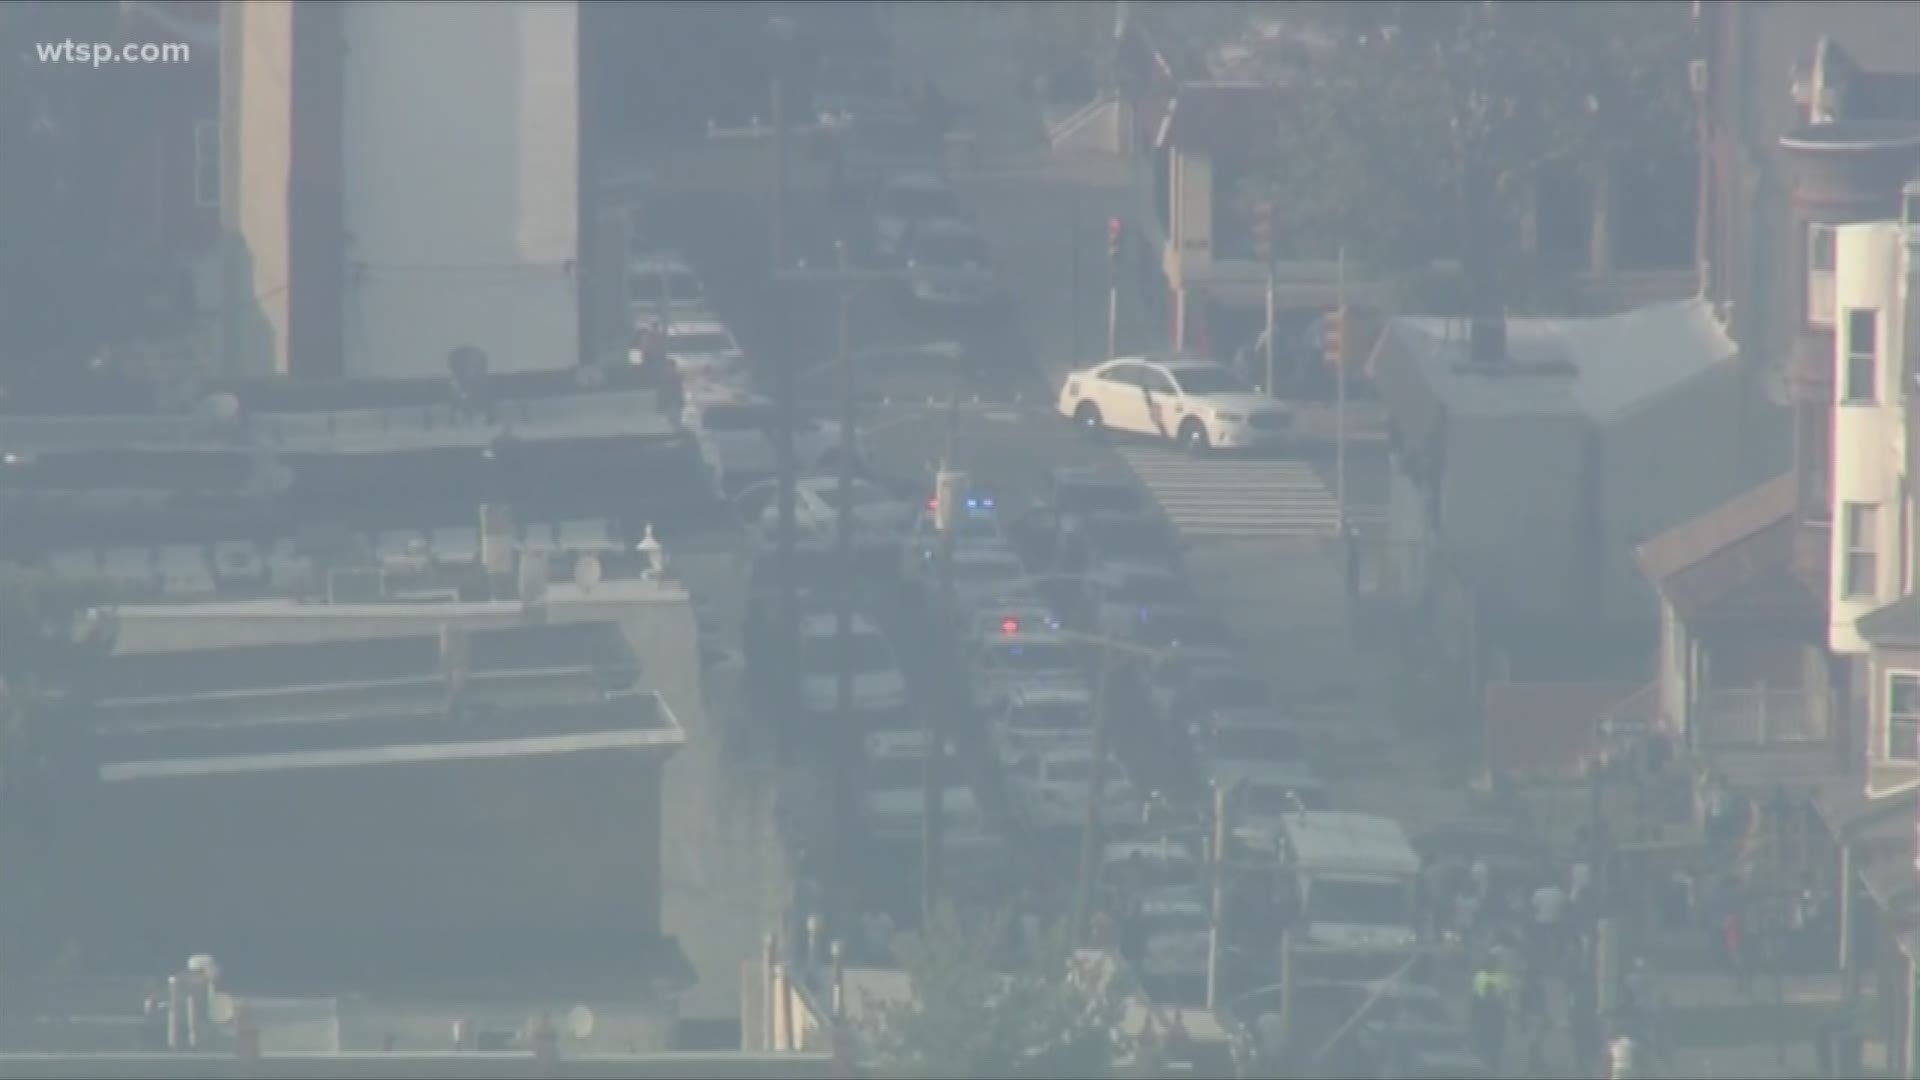 A Philadelphia Police sergeant says several police officers have been shot in what's still an active shooting situation in the city.

Sgt. Eric Gripp tweeted Wednesday shortly before 6 p.m. that all of the injuries are considered non-life threatening.